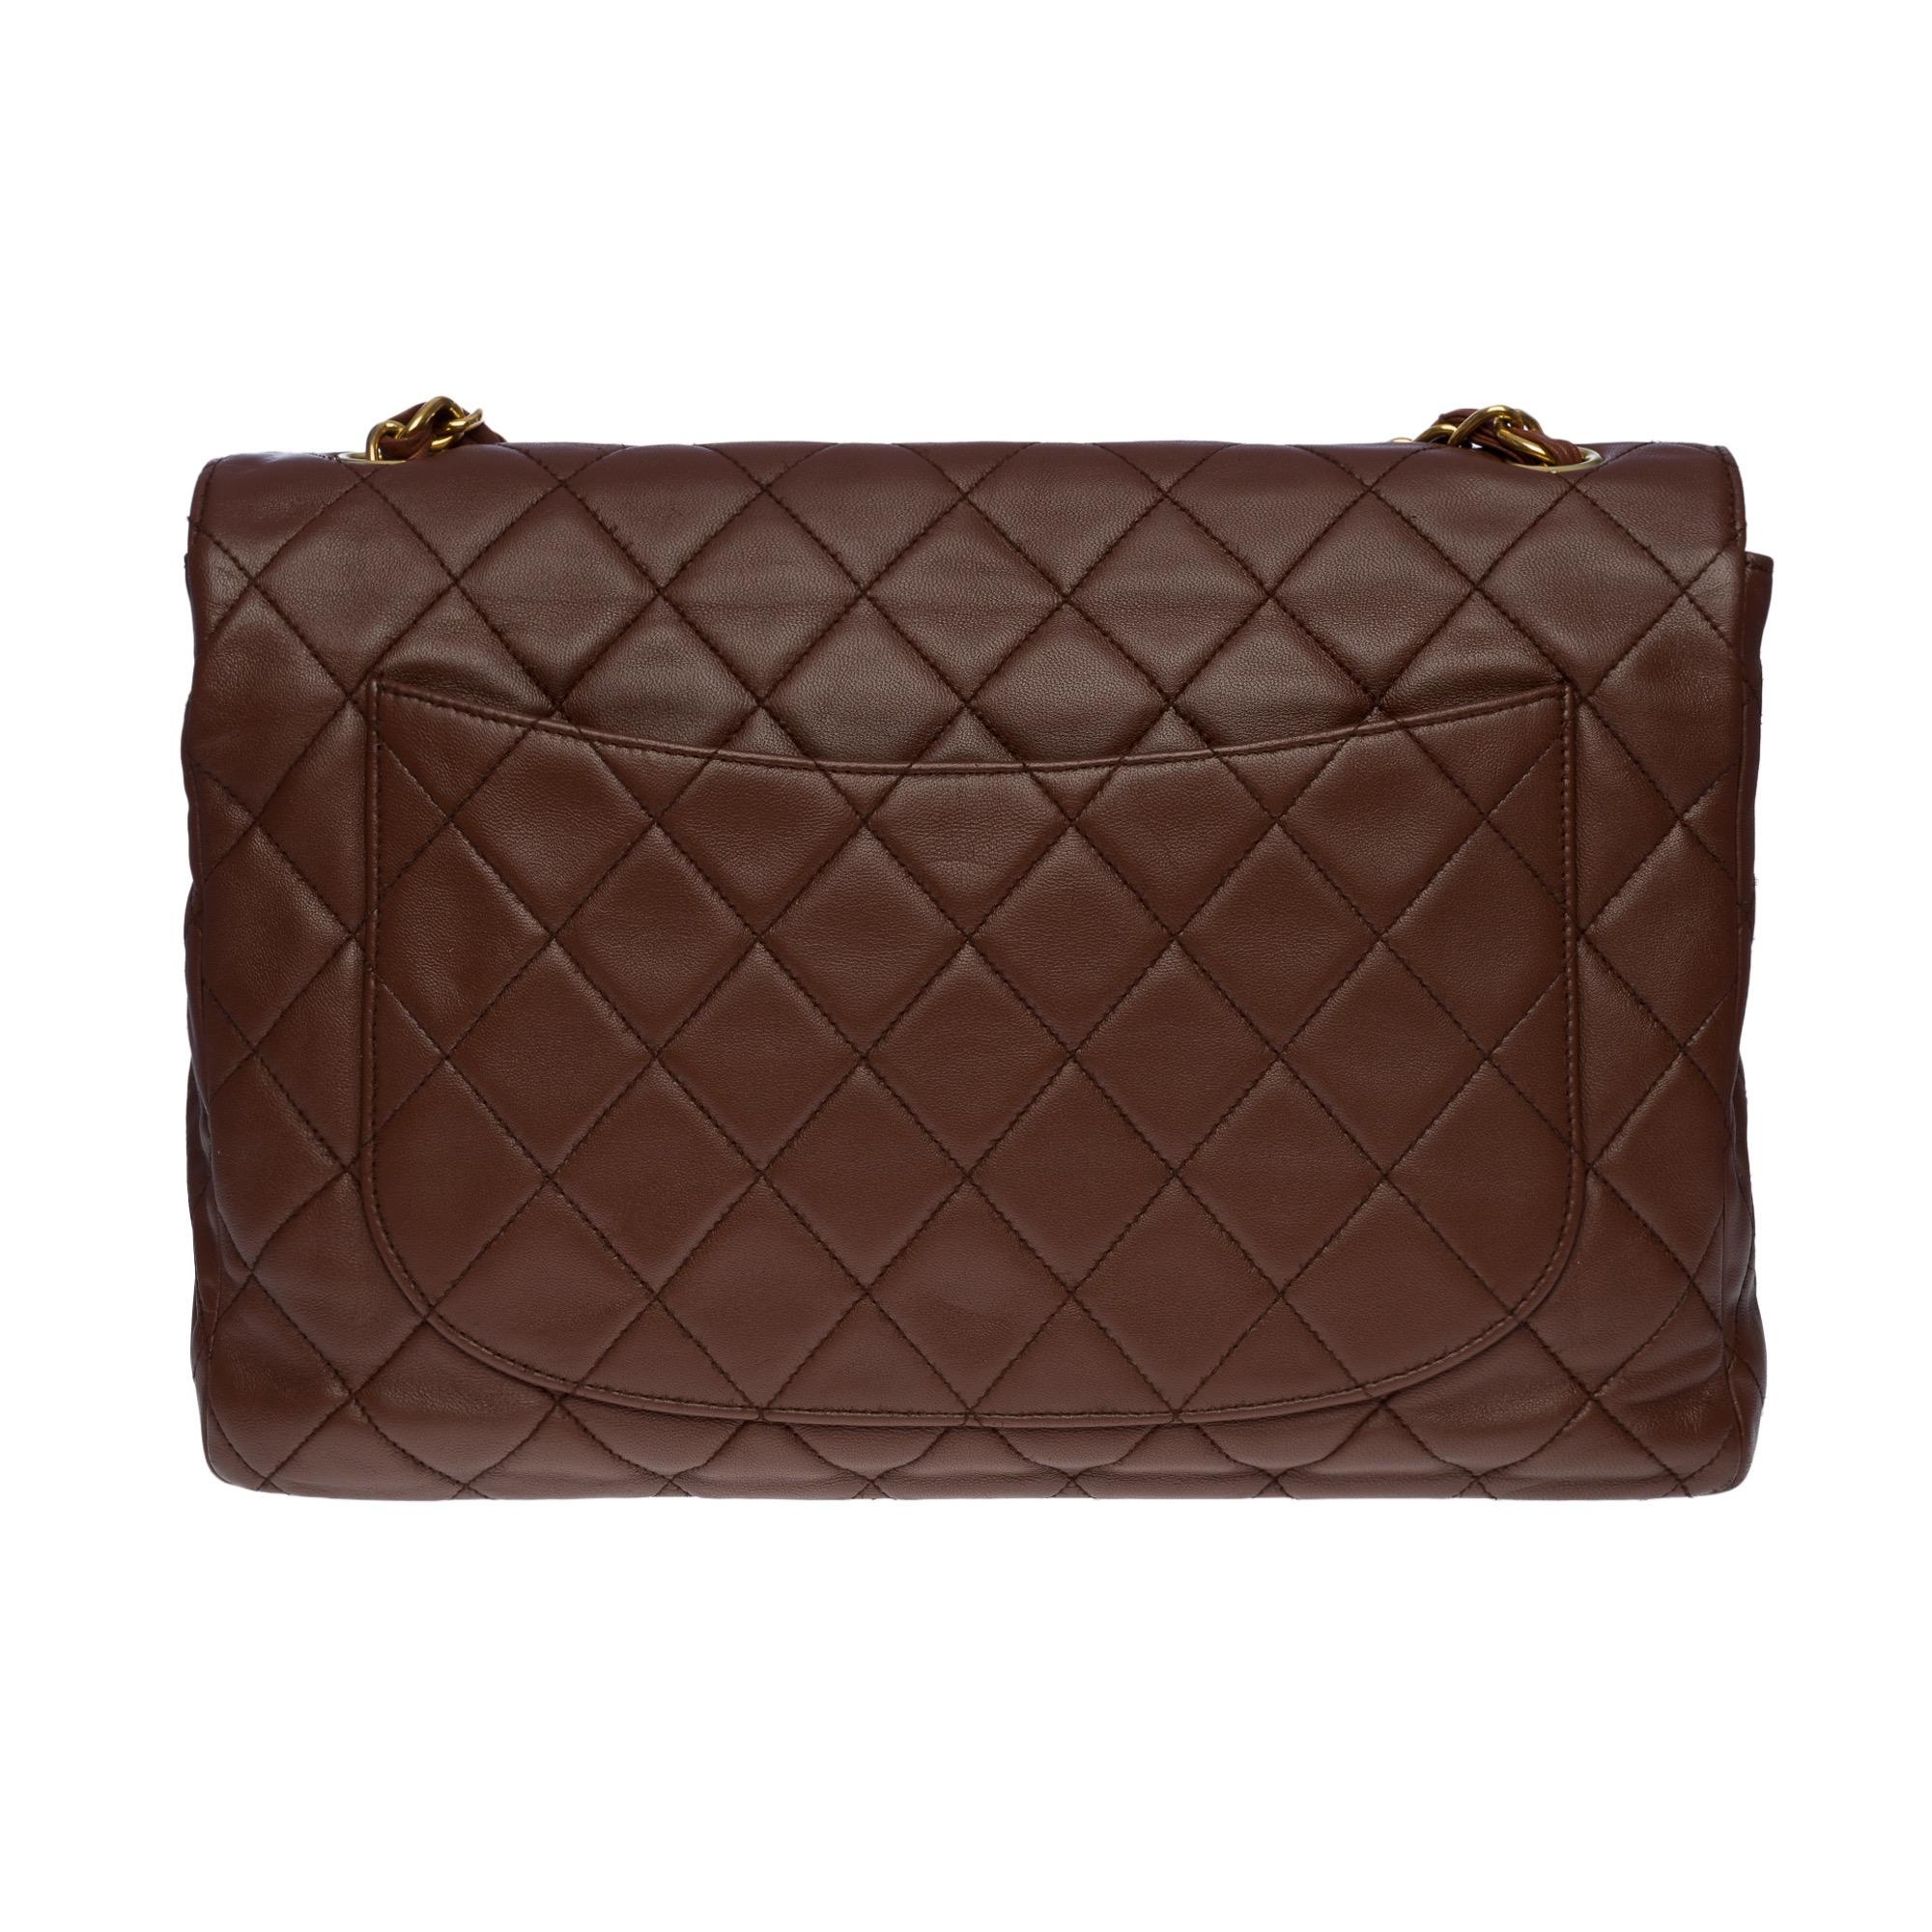 Majestic Chanel Timeless/Classic jumbo flap bag in brown quilted leather, gold metal hardware, a gold metal chain handle interlaced with brown leather for shoulder and shoulder strap
Patch pocket on the back of the bag
Flap closure, gold-plated CC